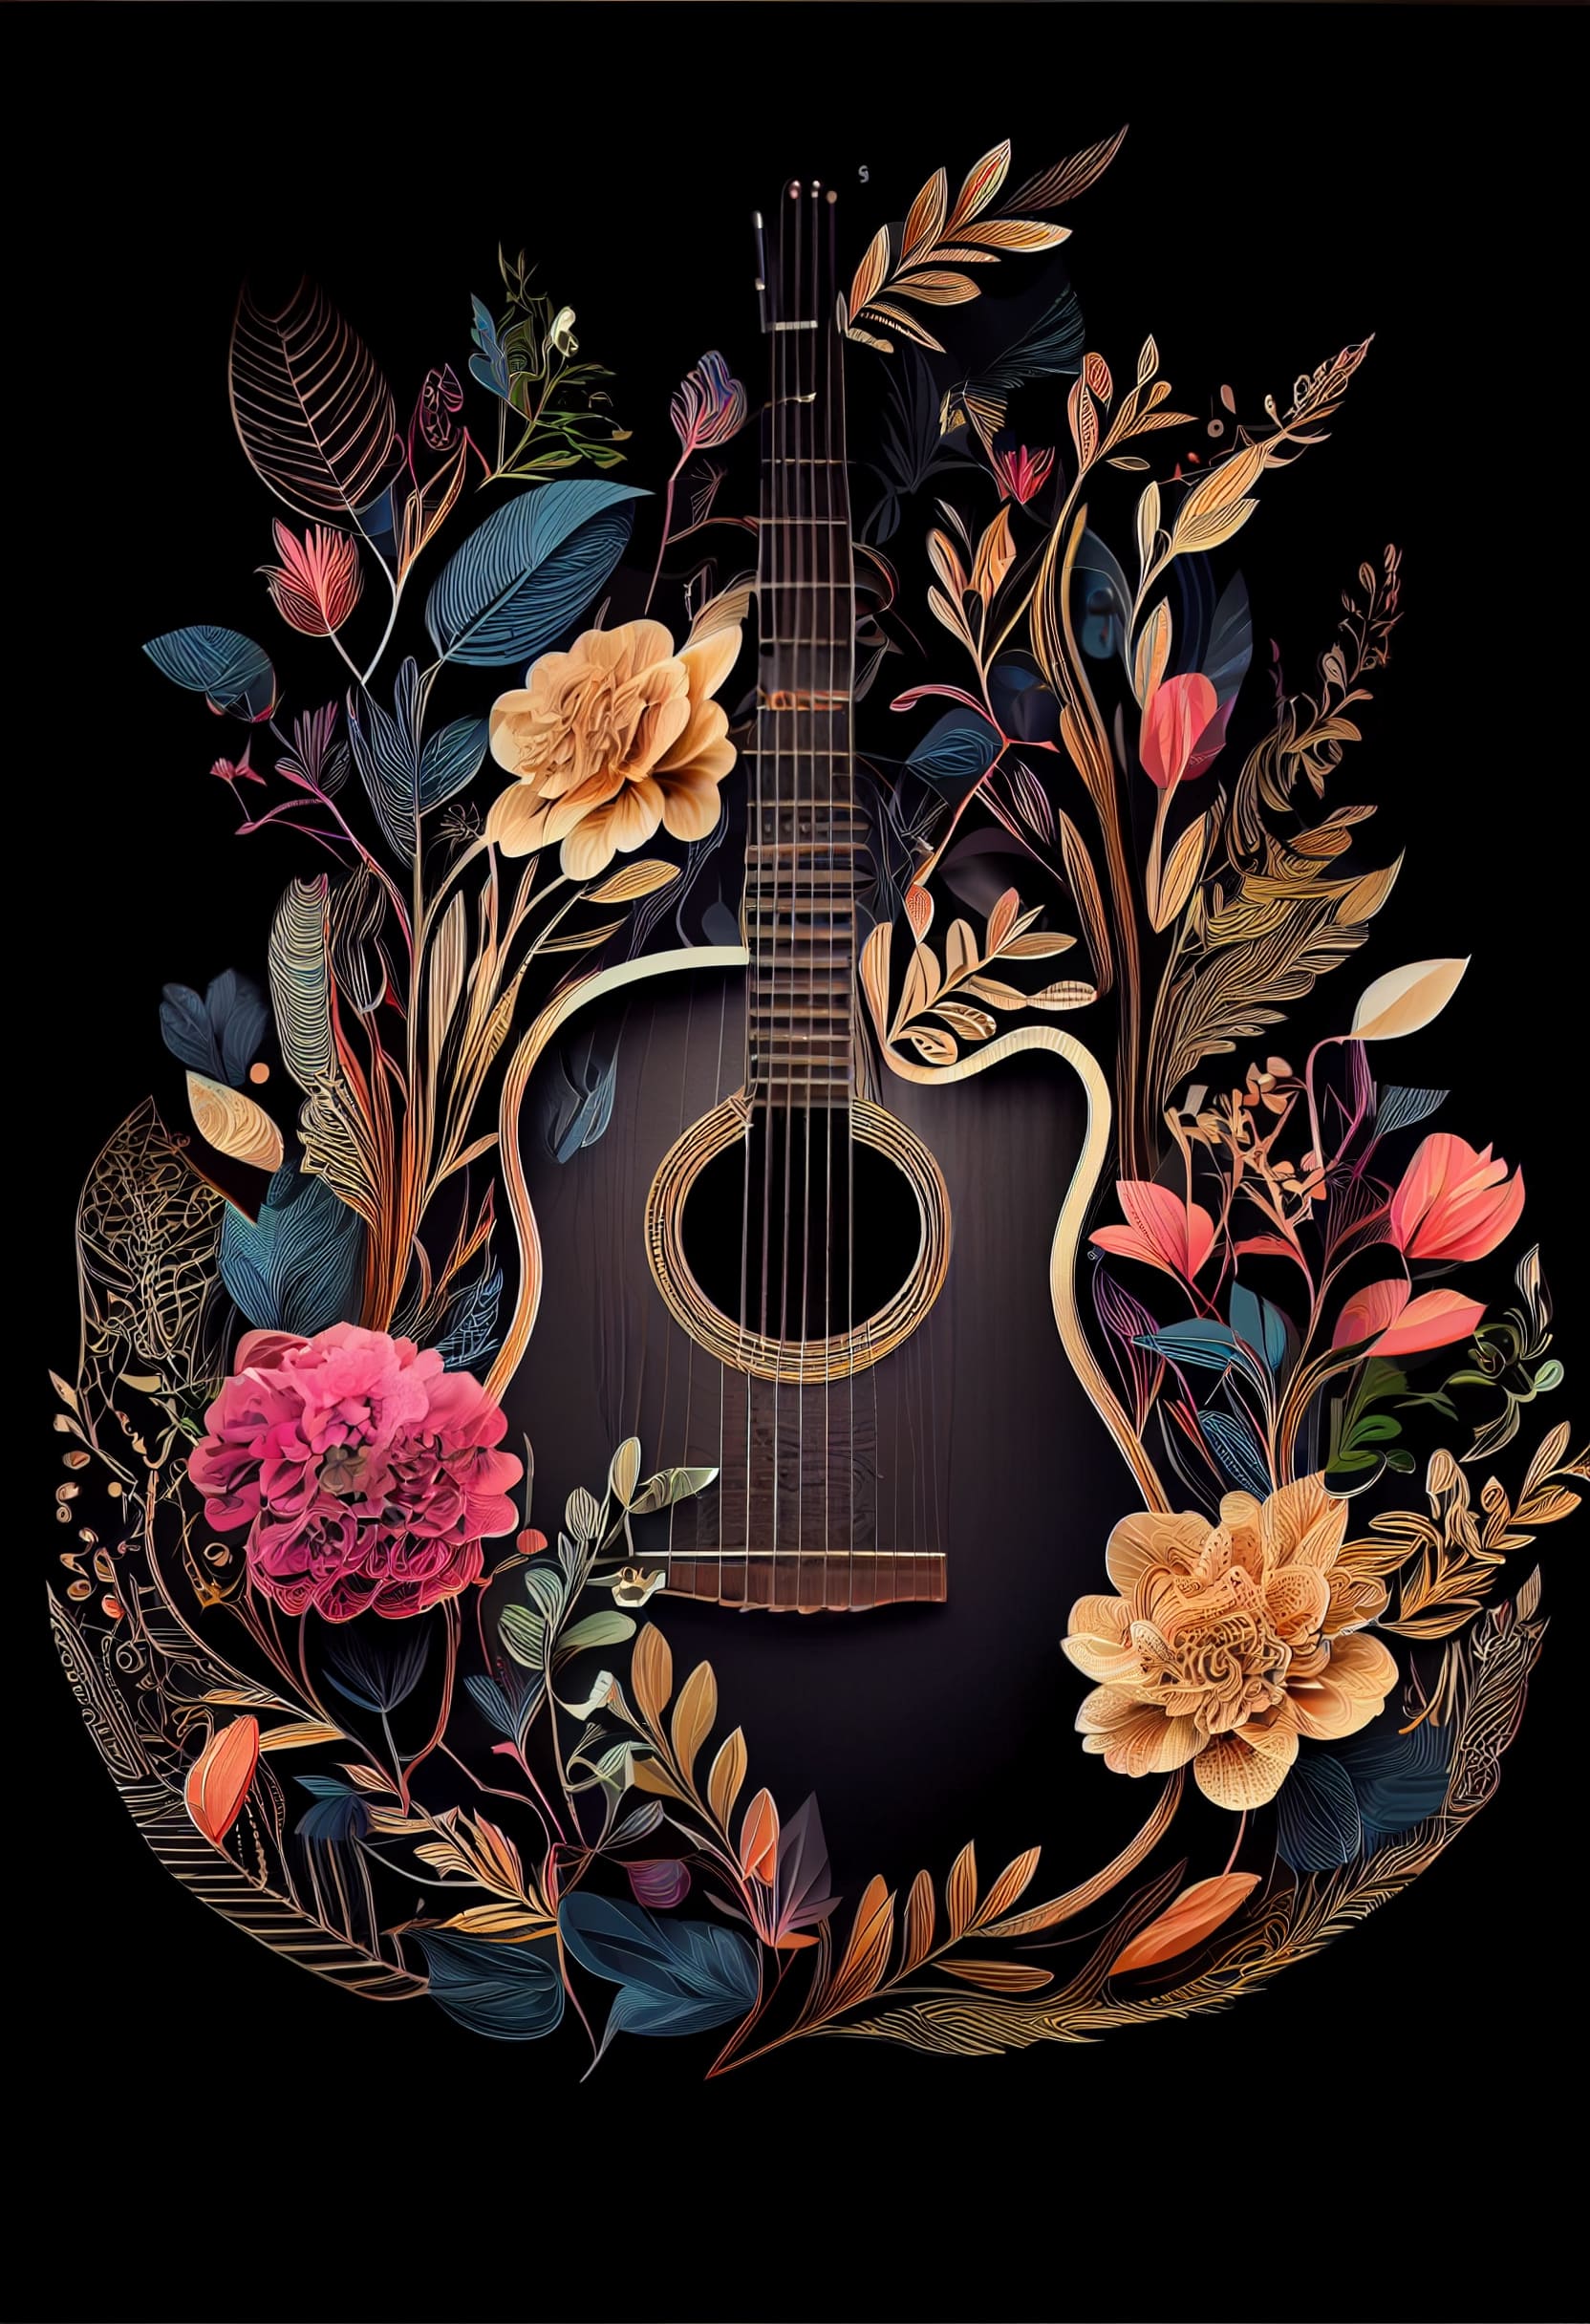 Guitar with flowers and leaves around it.